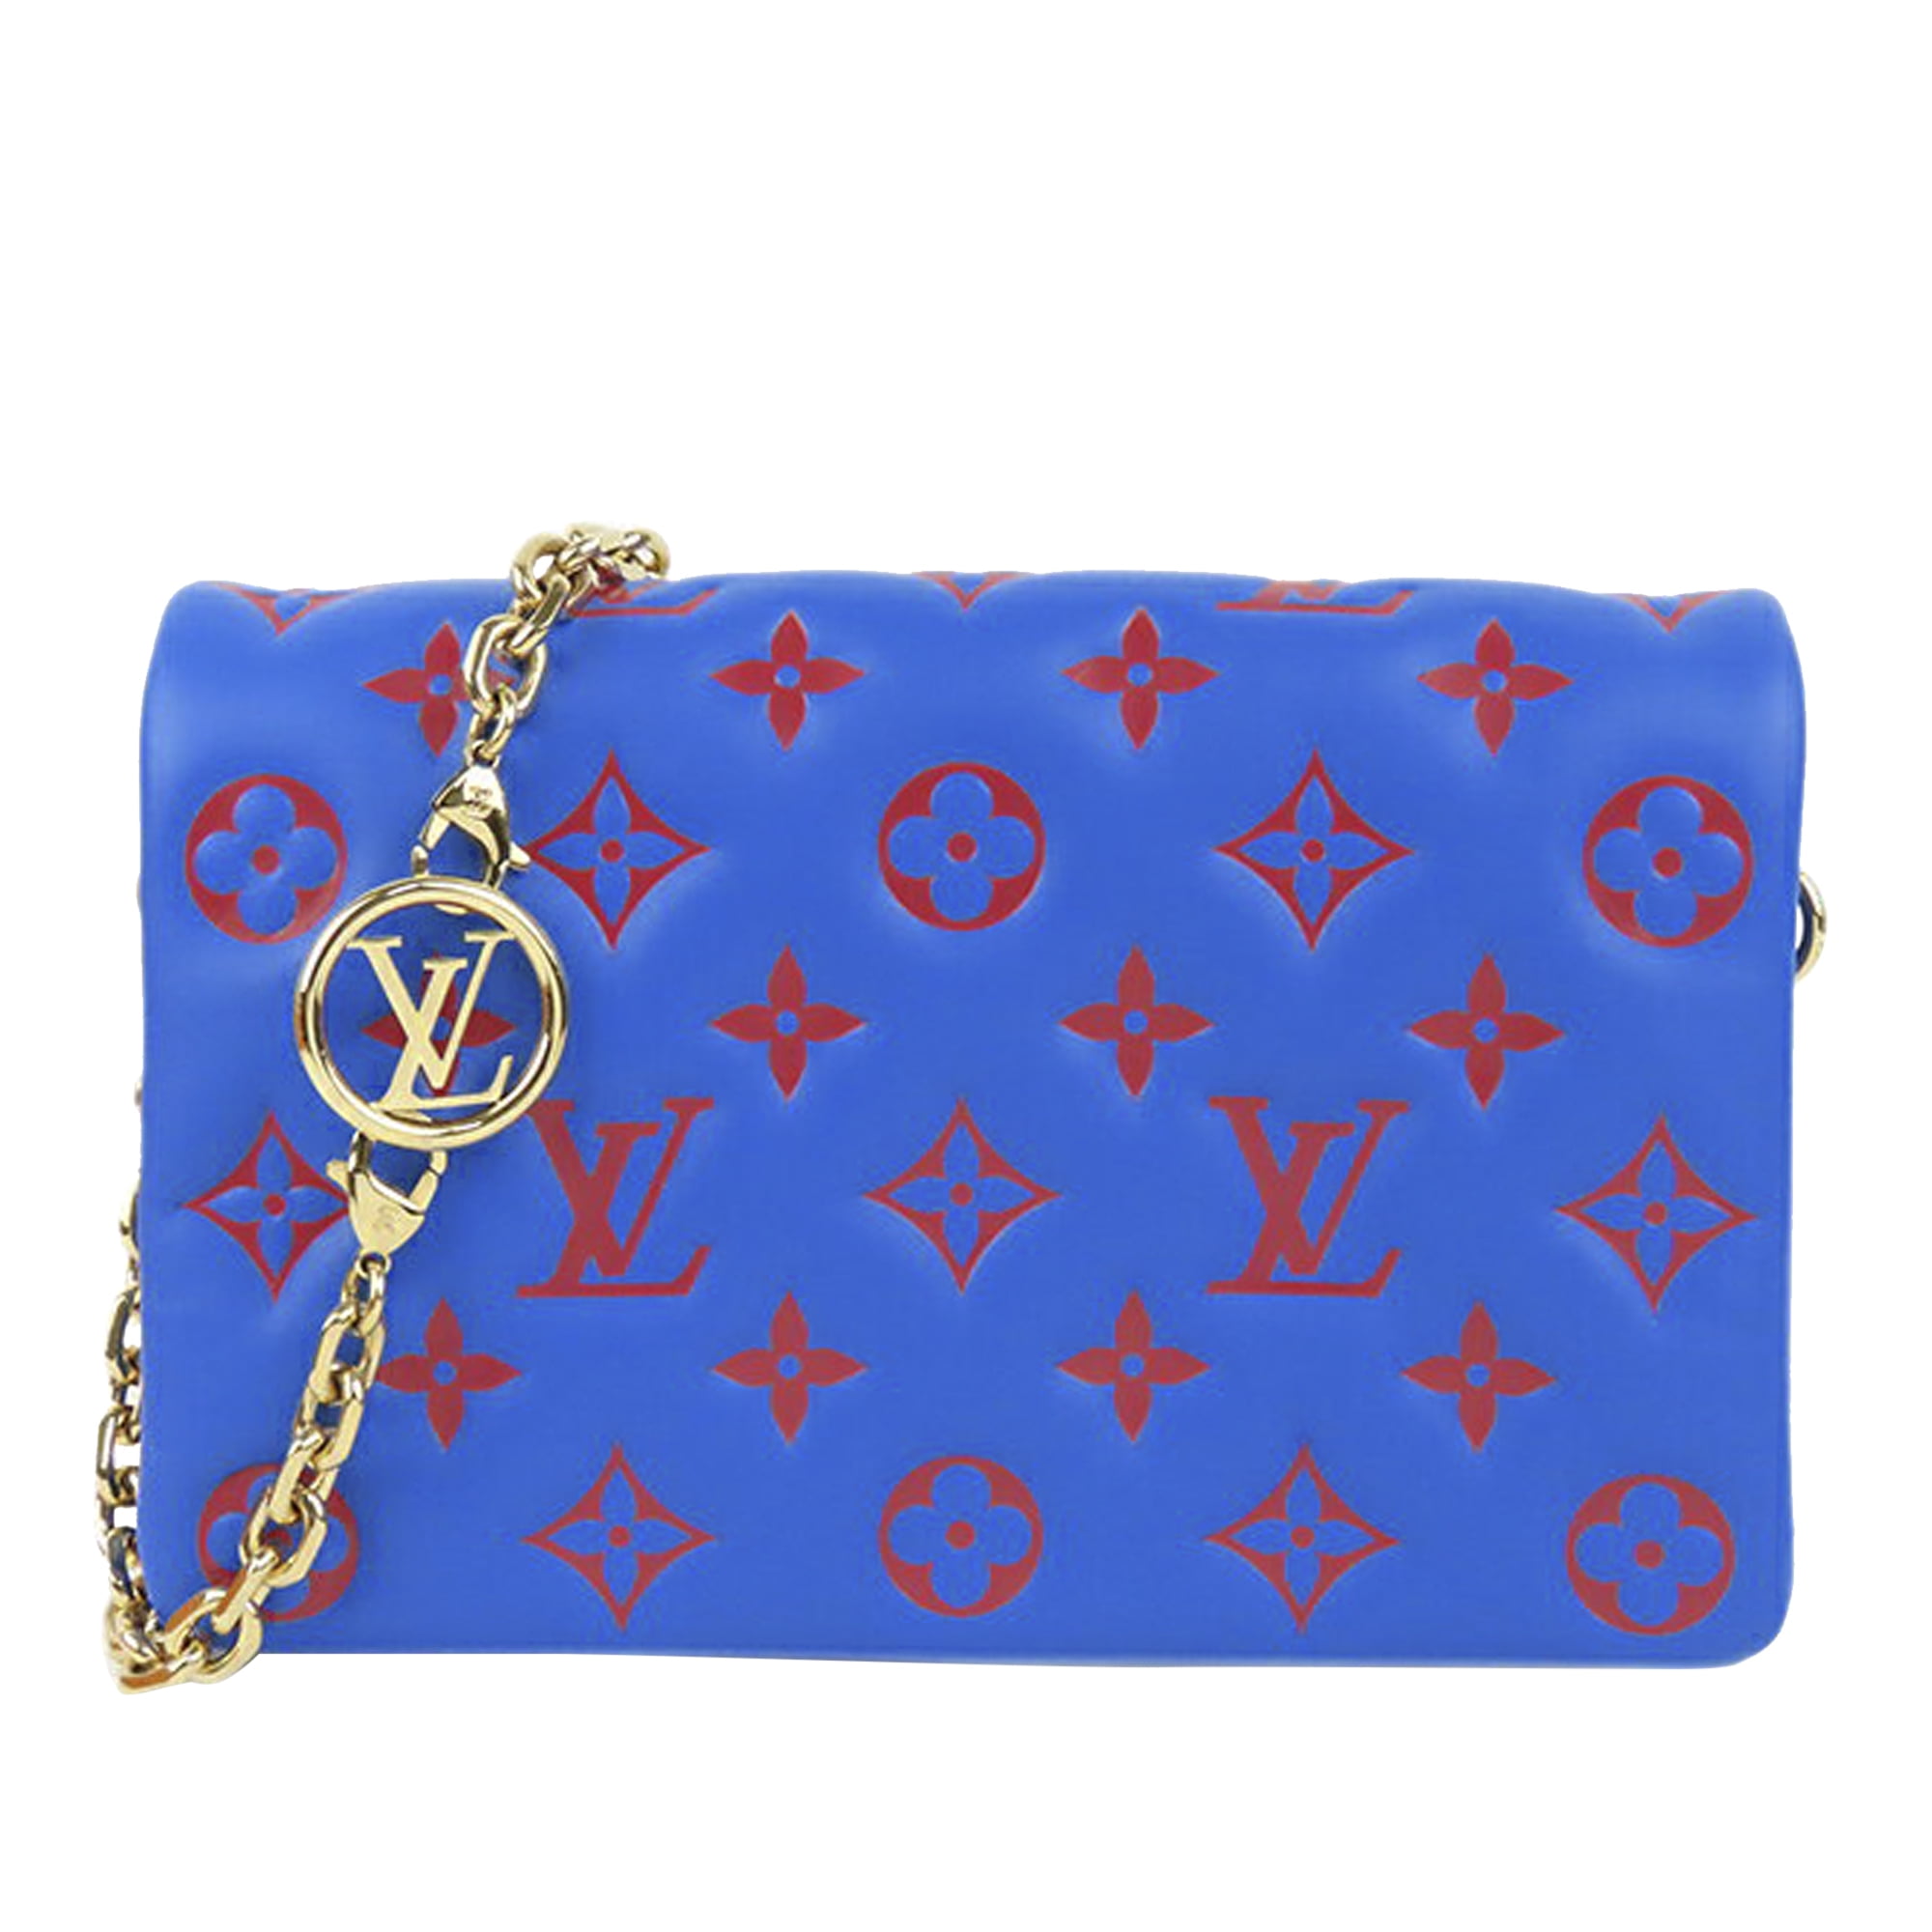 Women Pre-Owned Authenticated Louis Vuitton Monogram Coussin